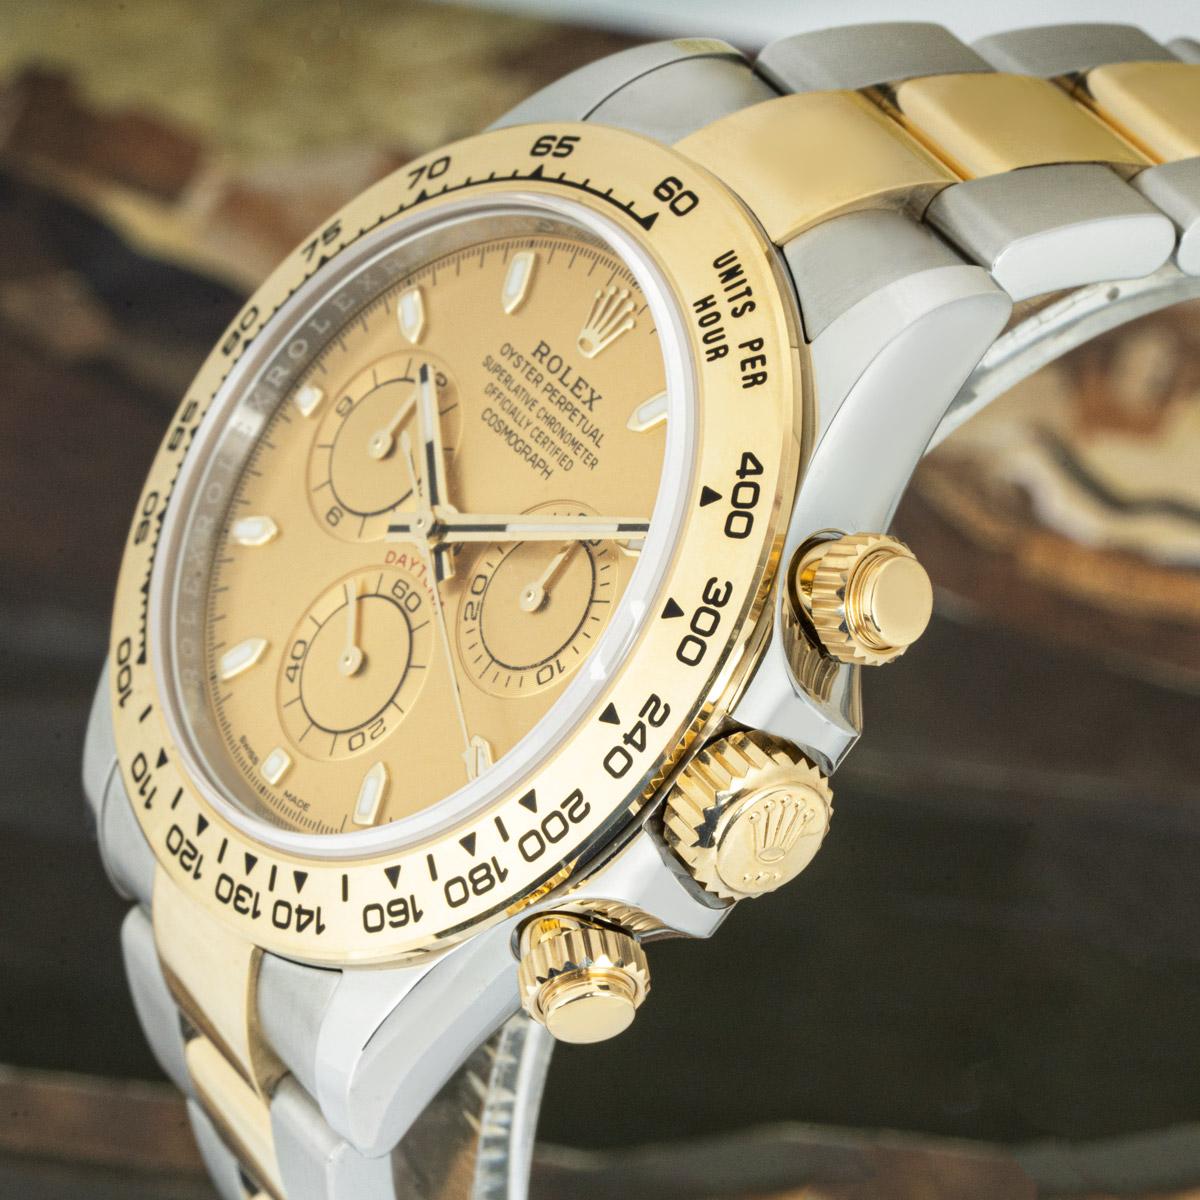 An unworn 116503 Daytona by Rolex in stainless steel and yellow gold. Featuring a champagne dial with applied hour markers. With an engraved tachymetric scale, three counters and pushers; the Daytona was designed to be the ultimate timing tool for